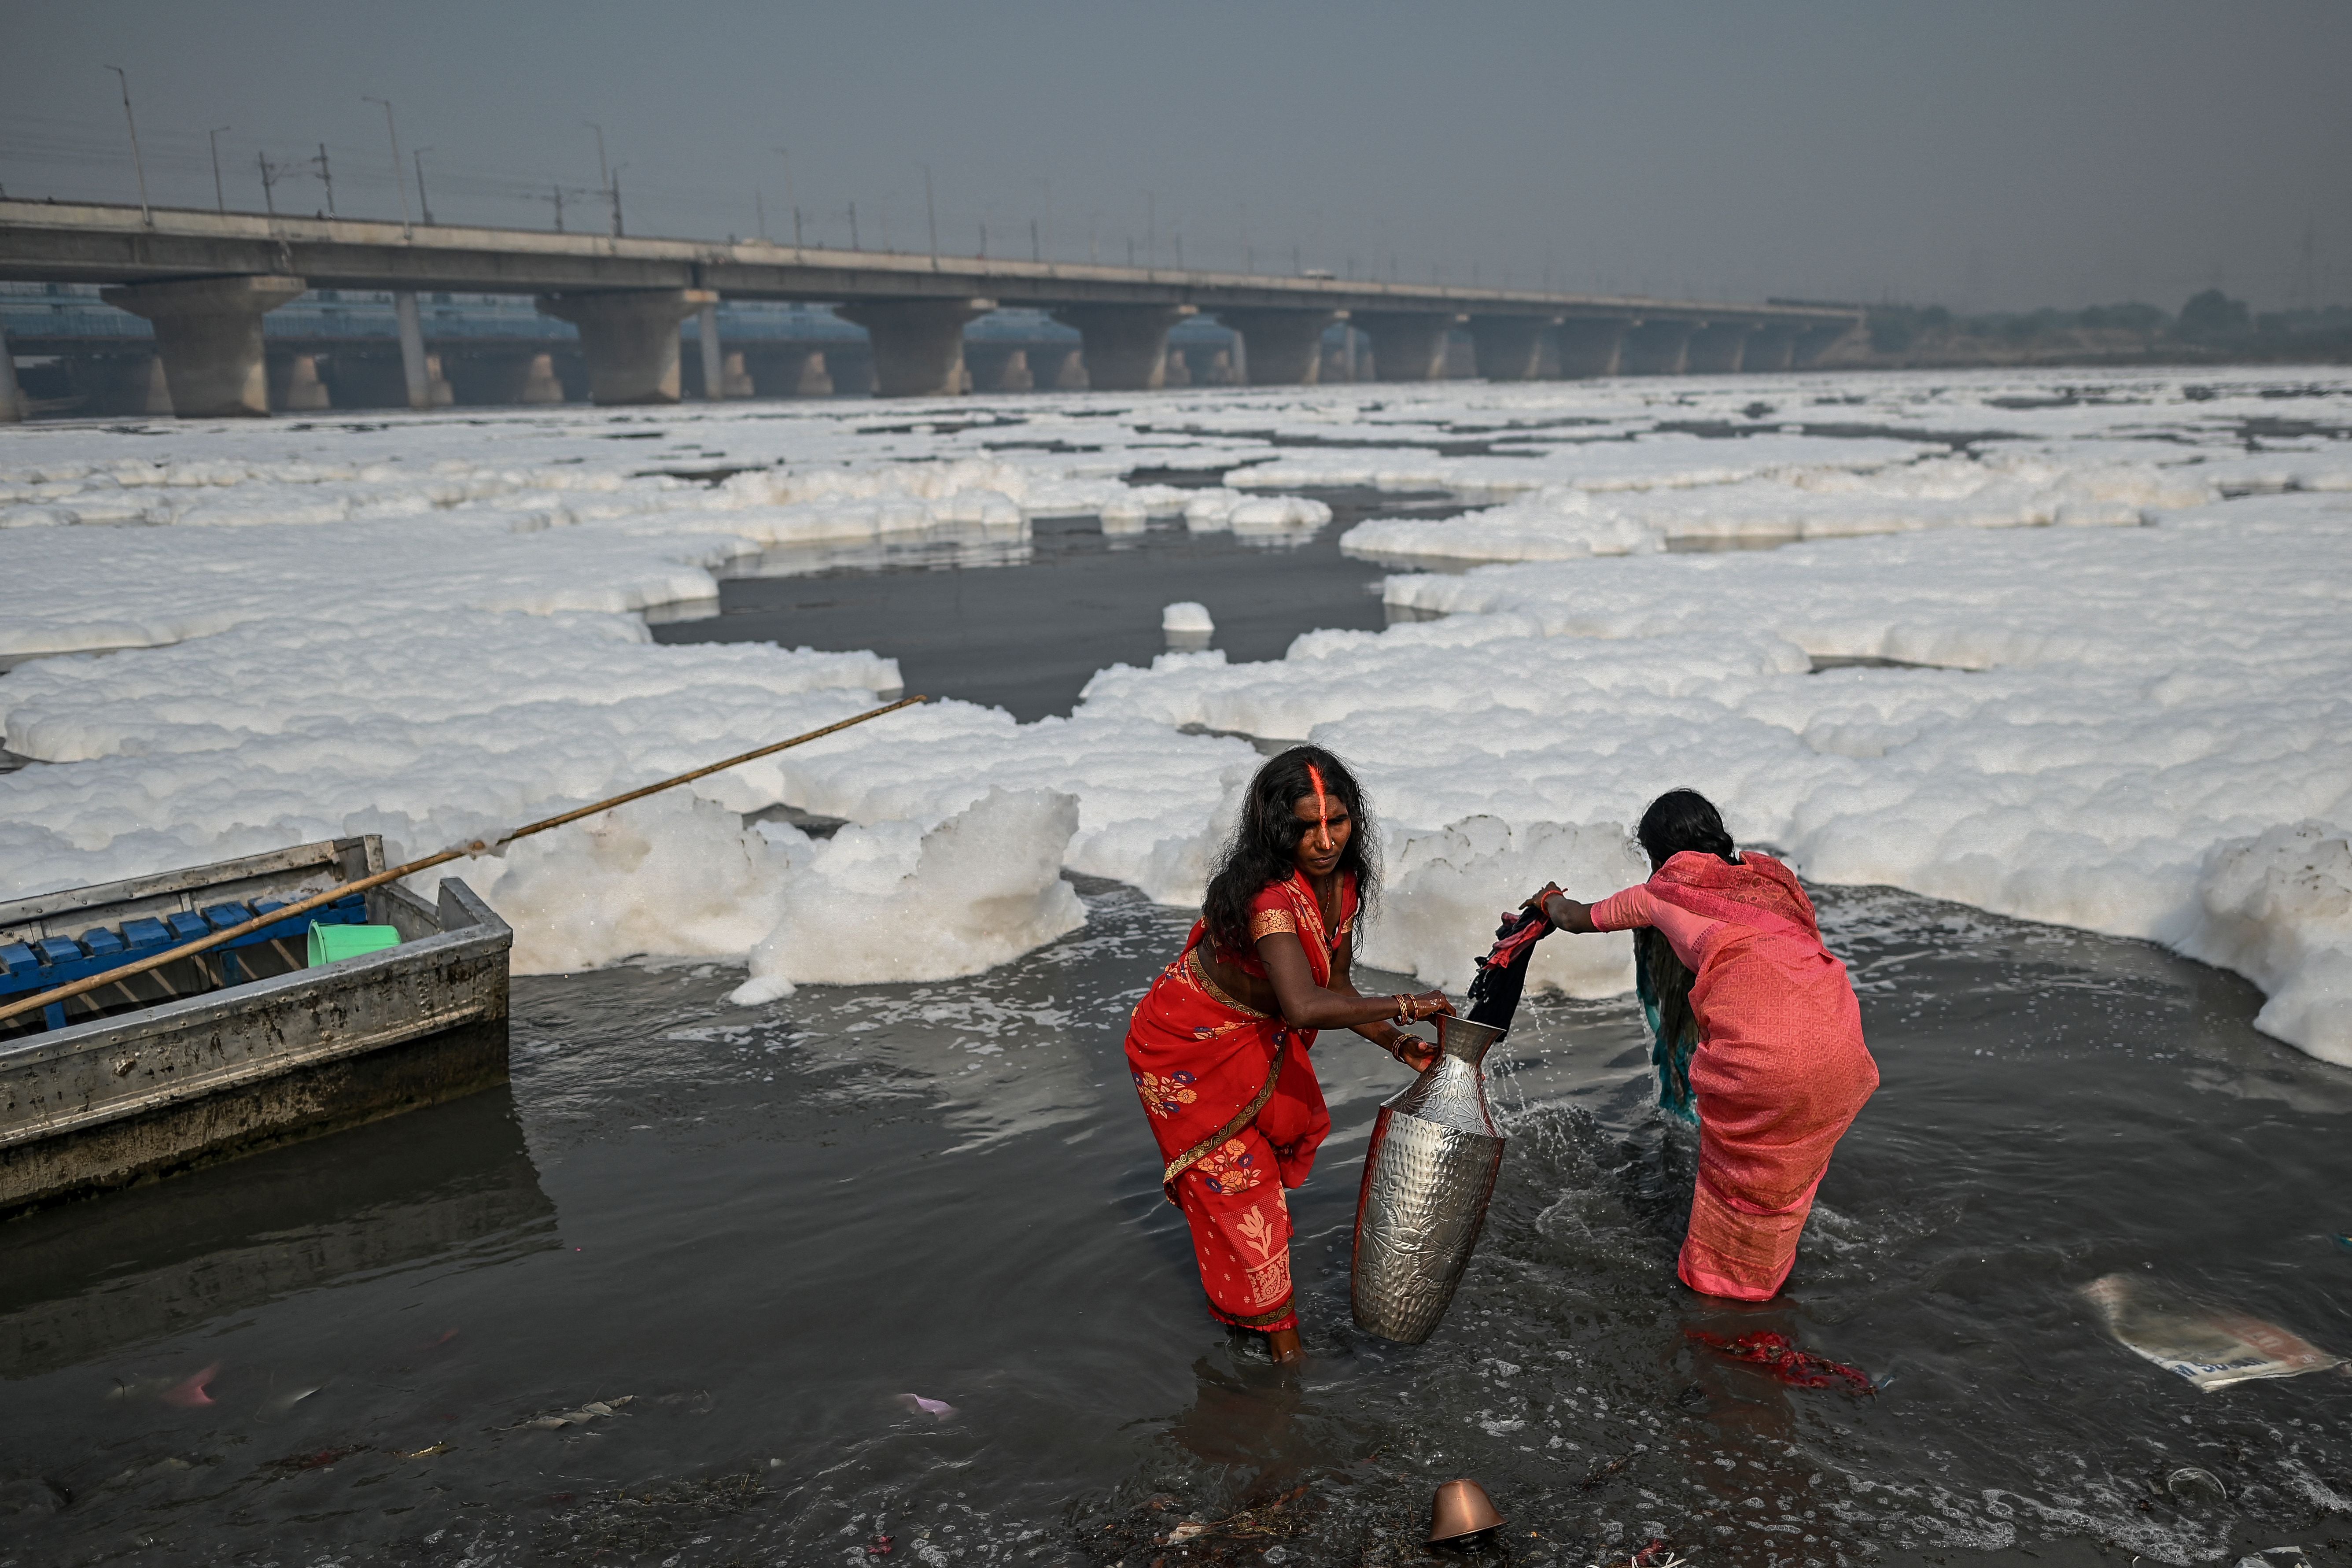 Women take a dip in the Yamuna river as part of rituals for Chhath